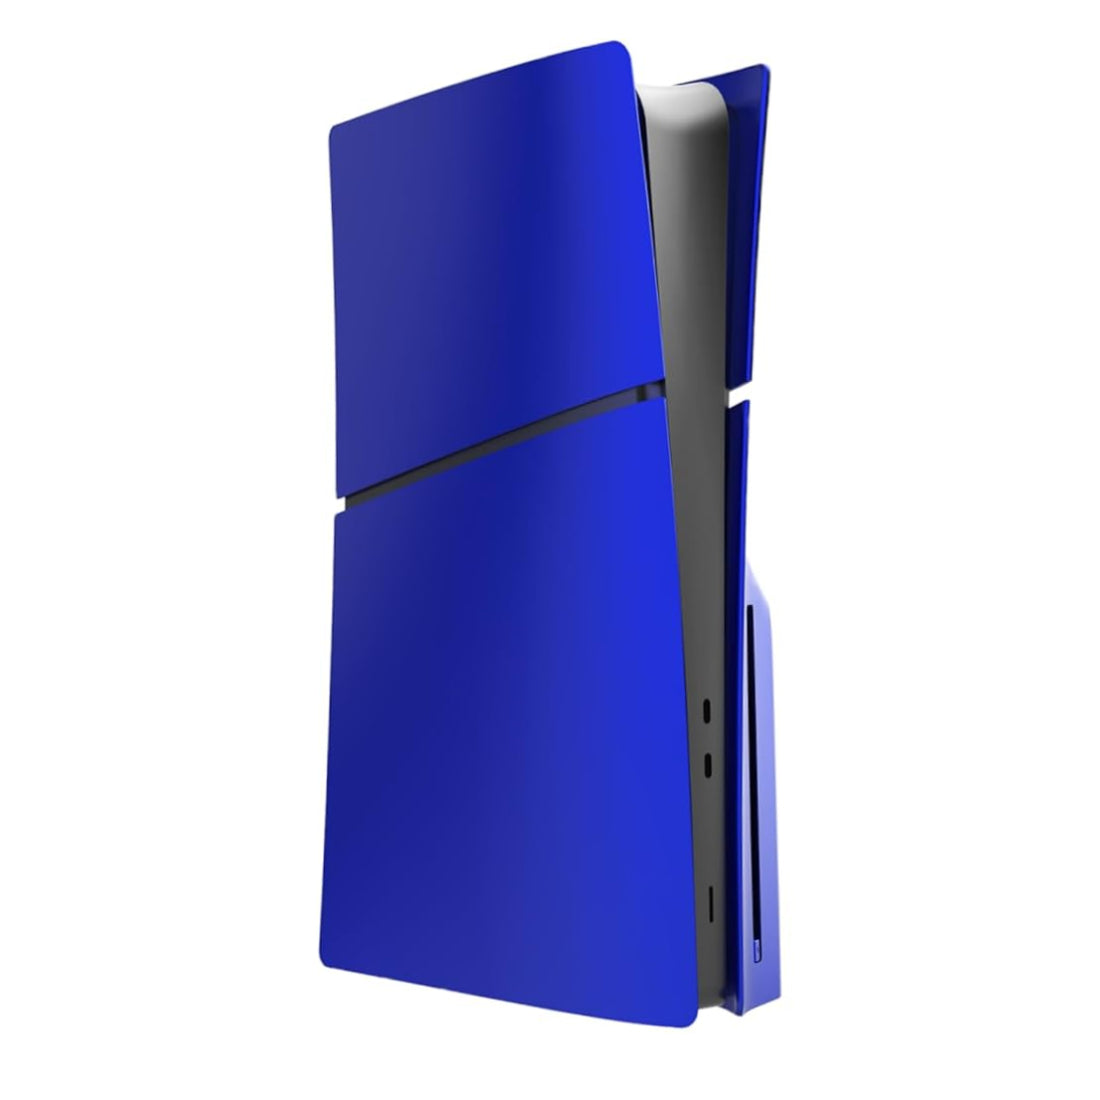 Faceplate Slim Plastic Cover For Playstation 5 - Disc Edition - Blue